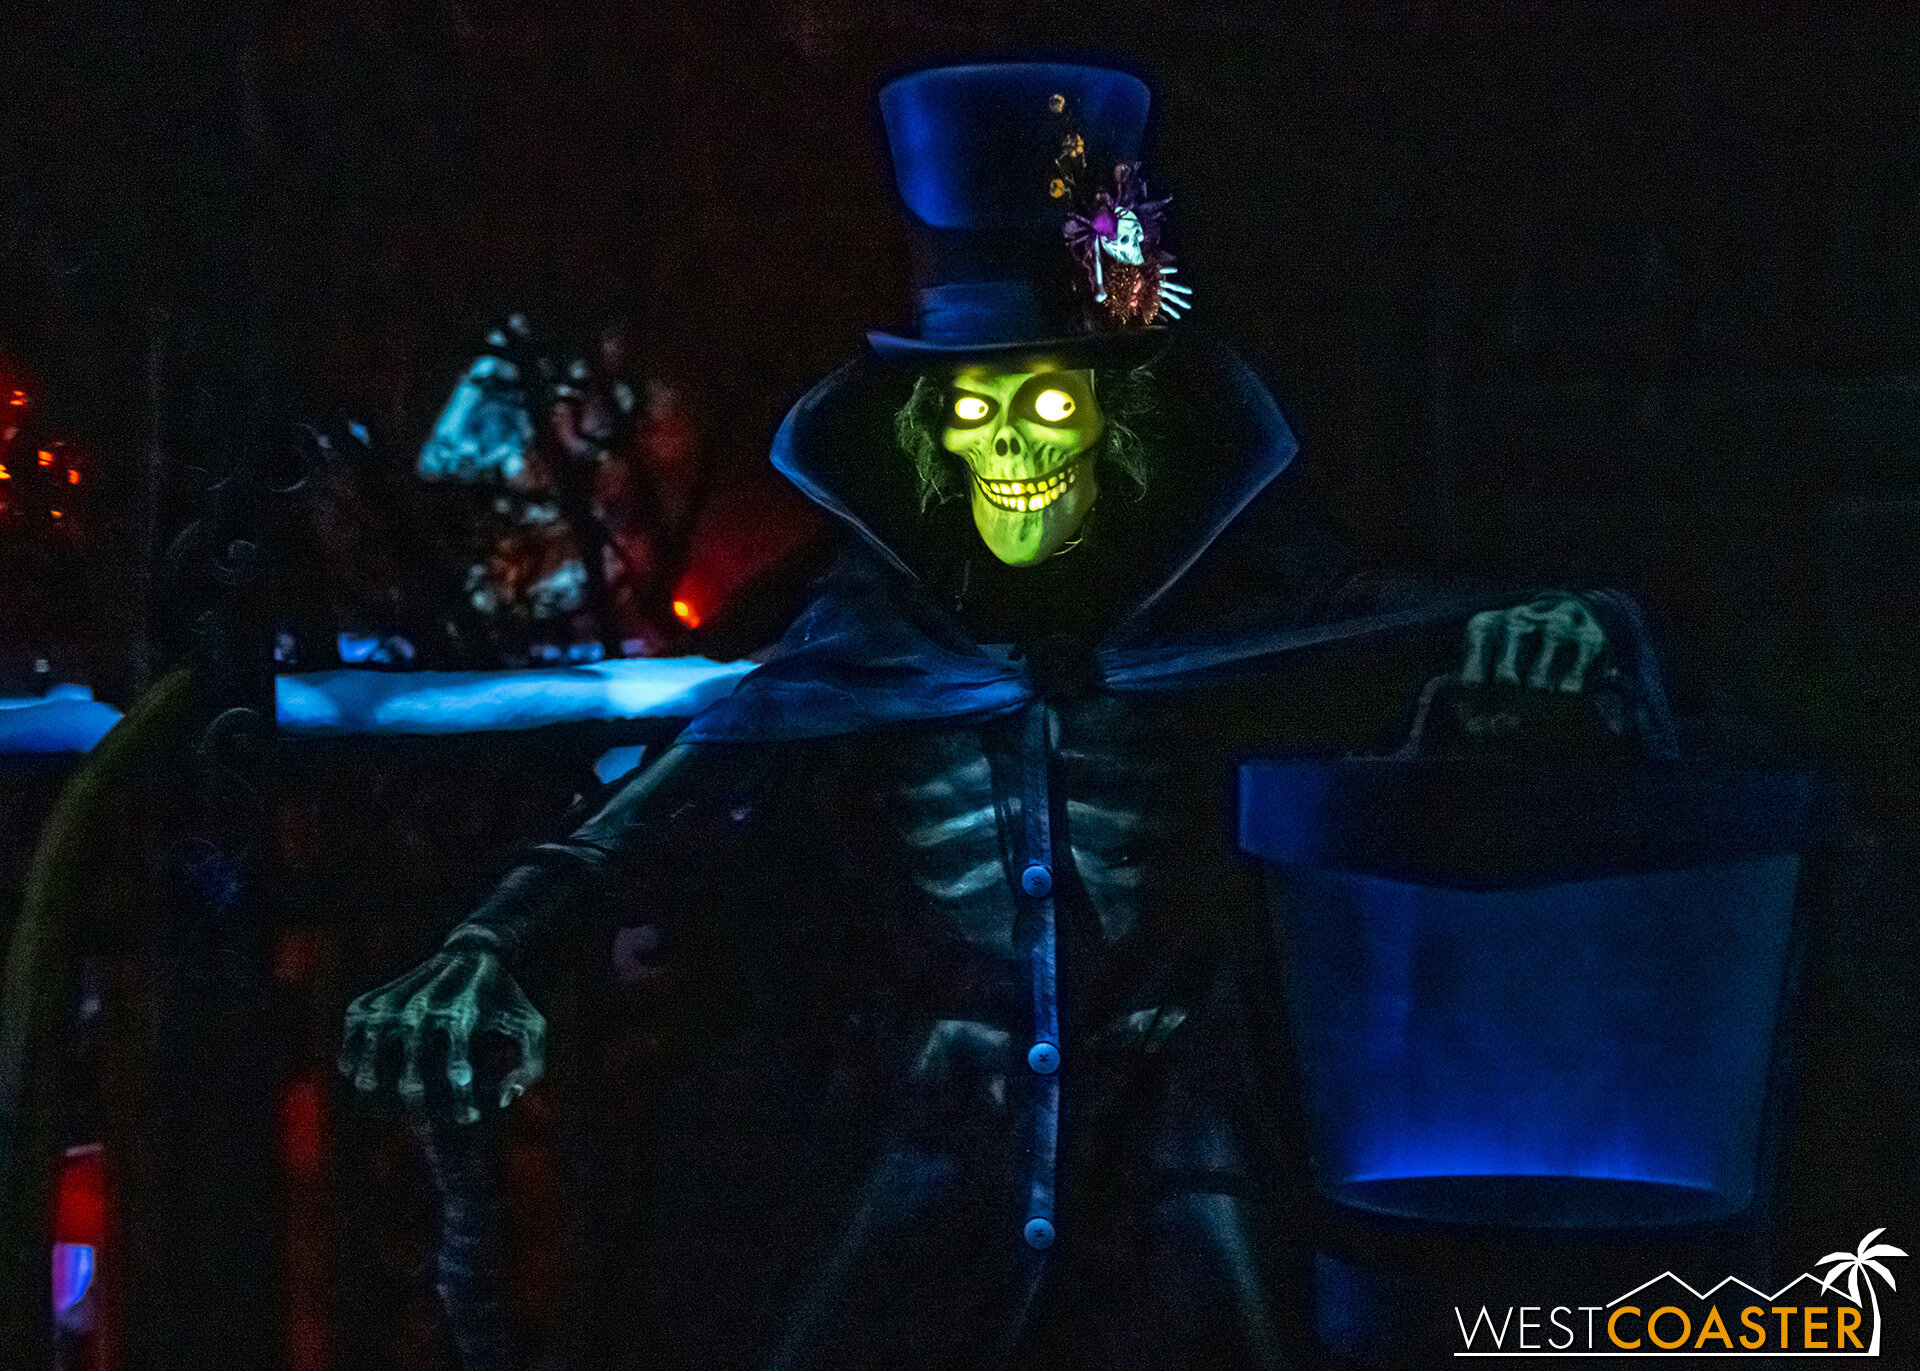  Before “falling out” of the attac, guests encounter the Hatbox Ghost. 